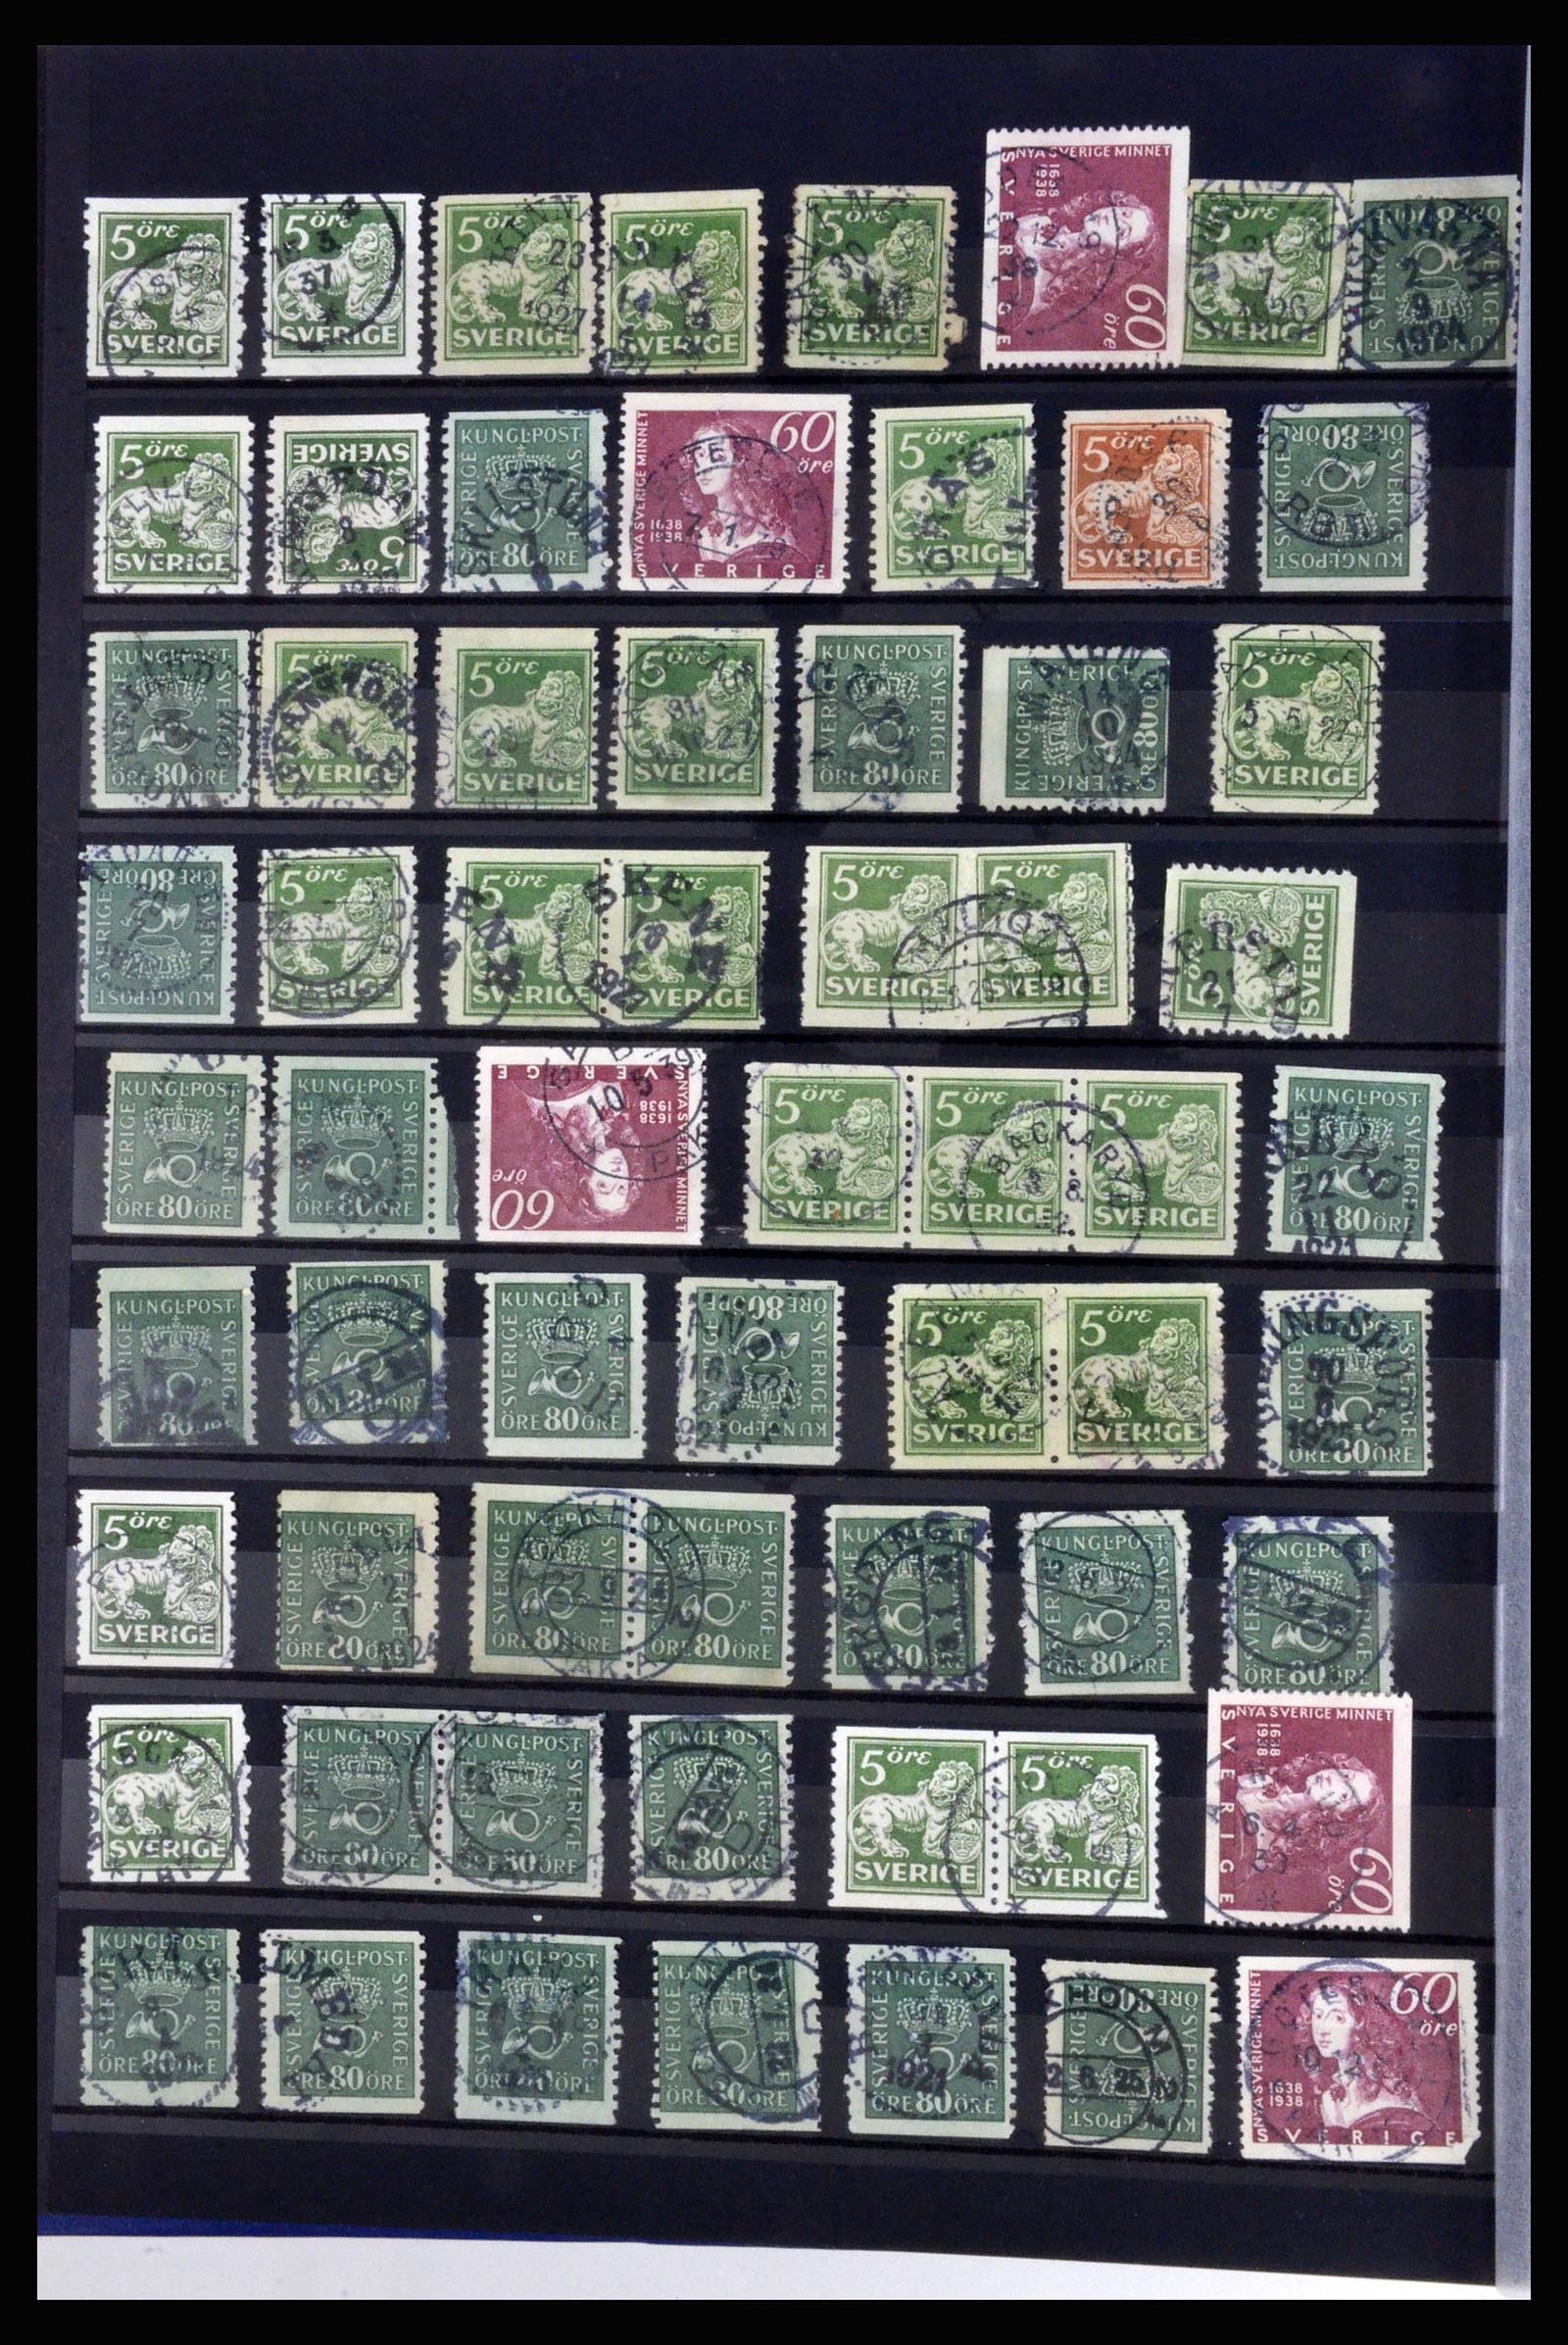 36316 018 - Stamp collection 36316 Sweden cancellations 1920-1938.